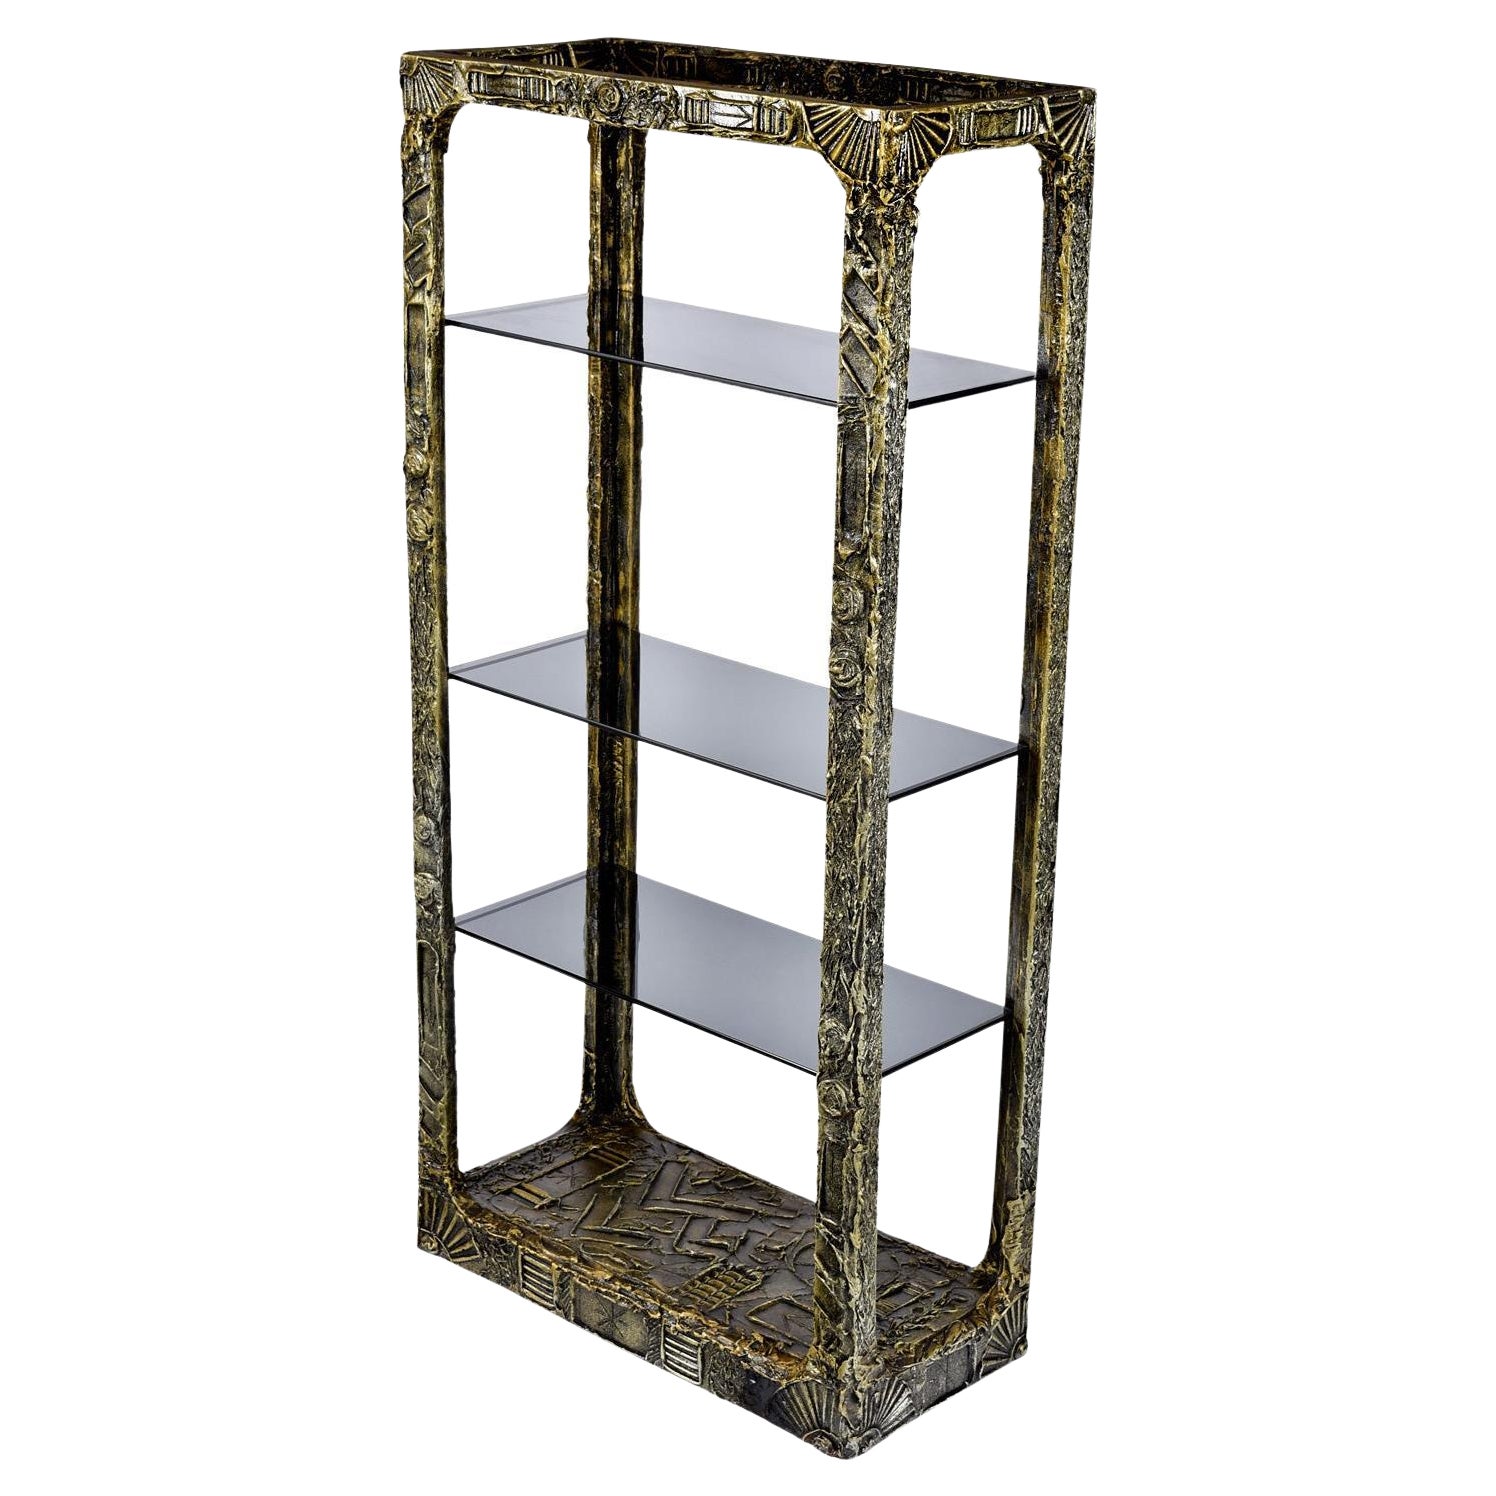 Did you ever wonder where Ridley Scott displayed his glass unicorns?  Well, wonder no more.  This sinister etagere is not only hard to find, but we promise you won't come across a nicer version of this Adrian Pearsall Brutalist Display Cabinet